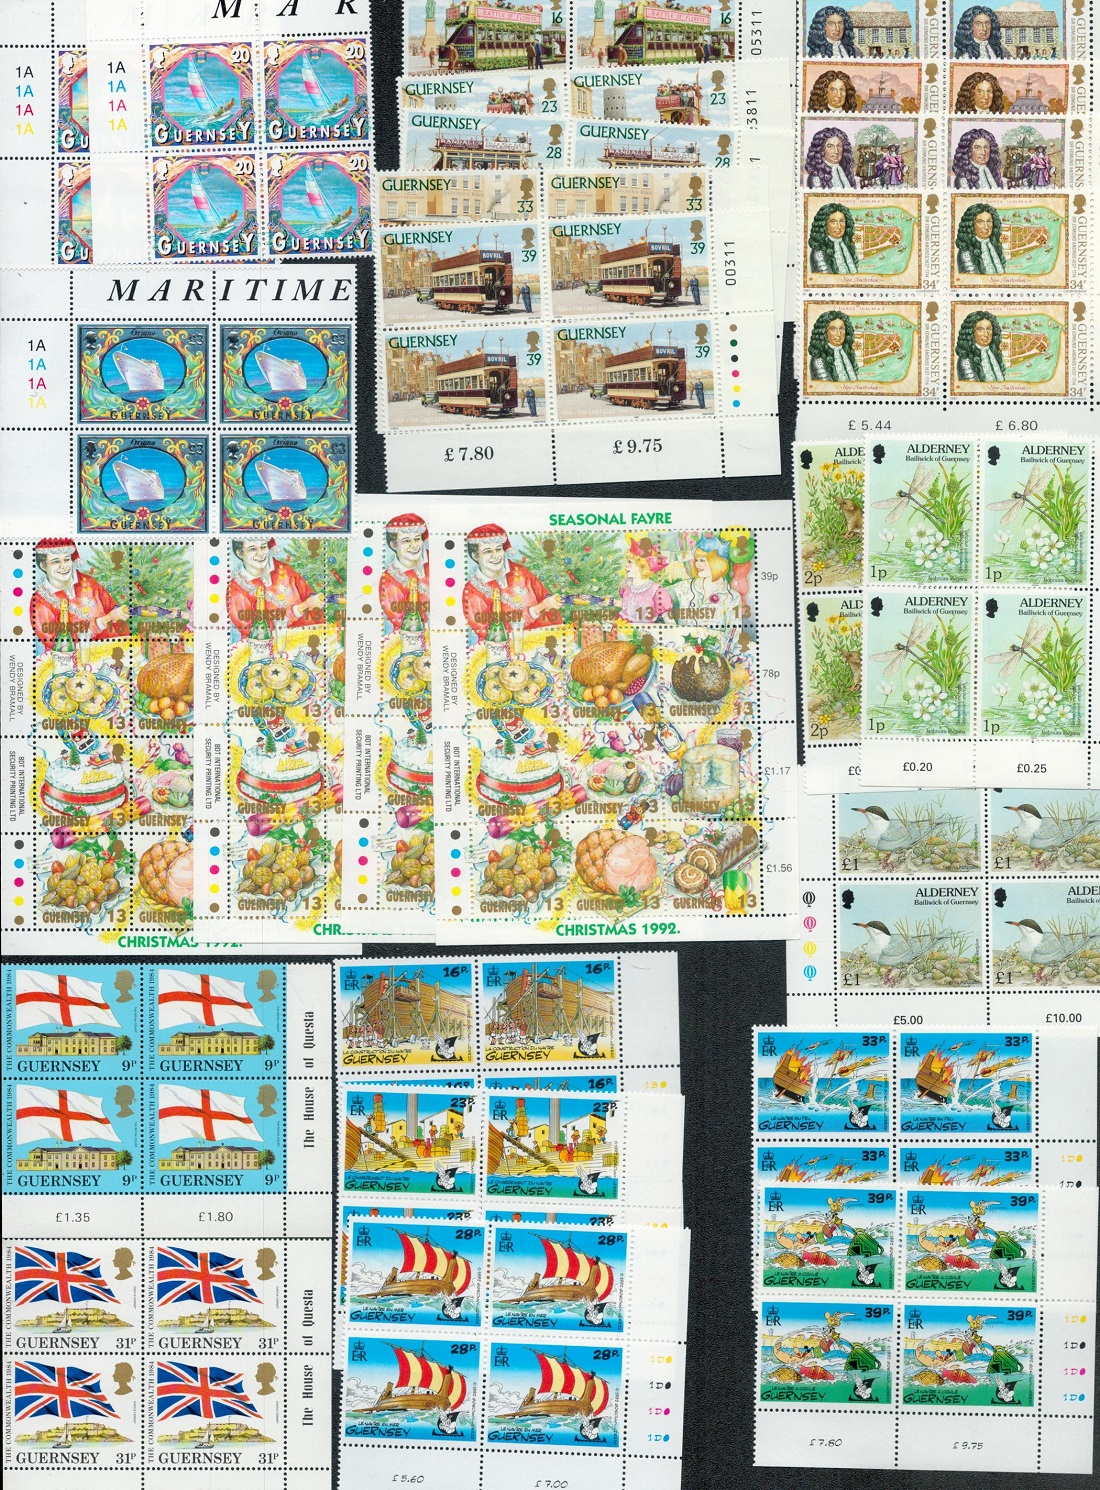 Mint Stamp Sheets Guernsey Collection Includes The Millennium Tapestries (Guernsey 50 x 25p), - Image 2 of 2